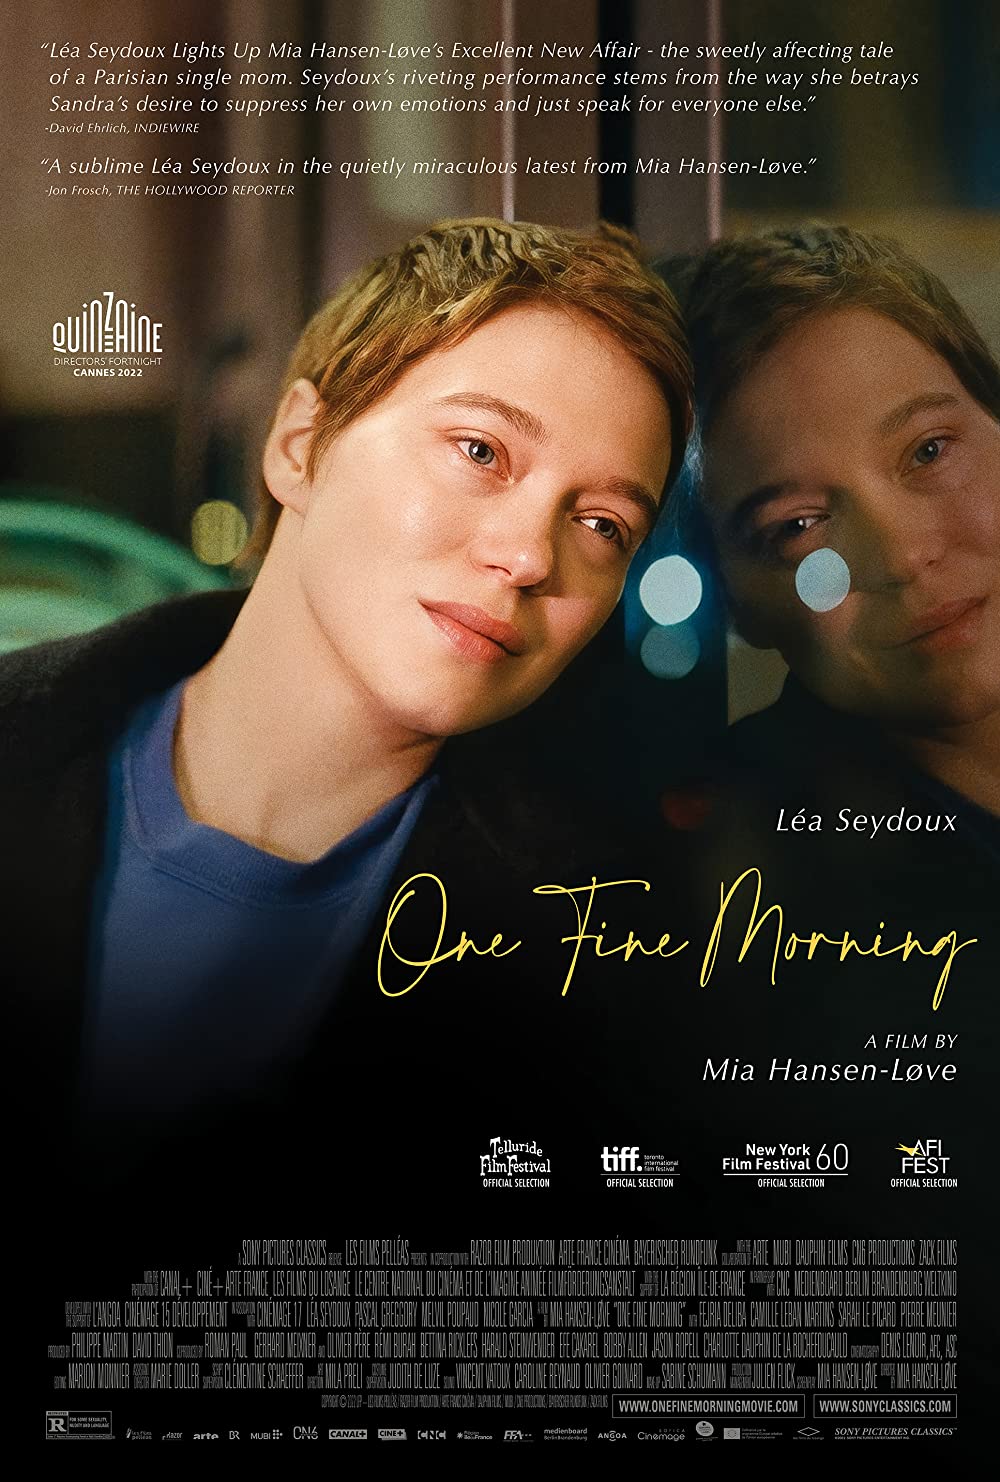 Love Will Remain: A Film Review of “One Fine Morning”